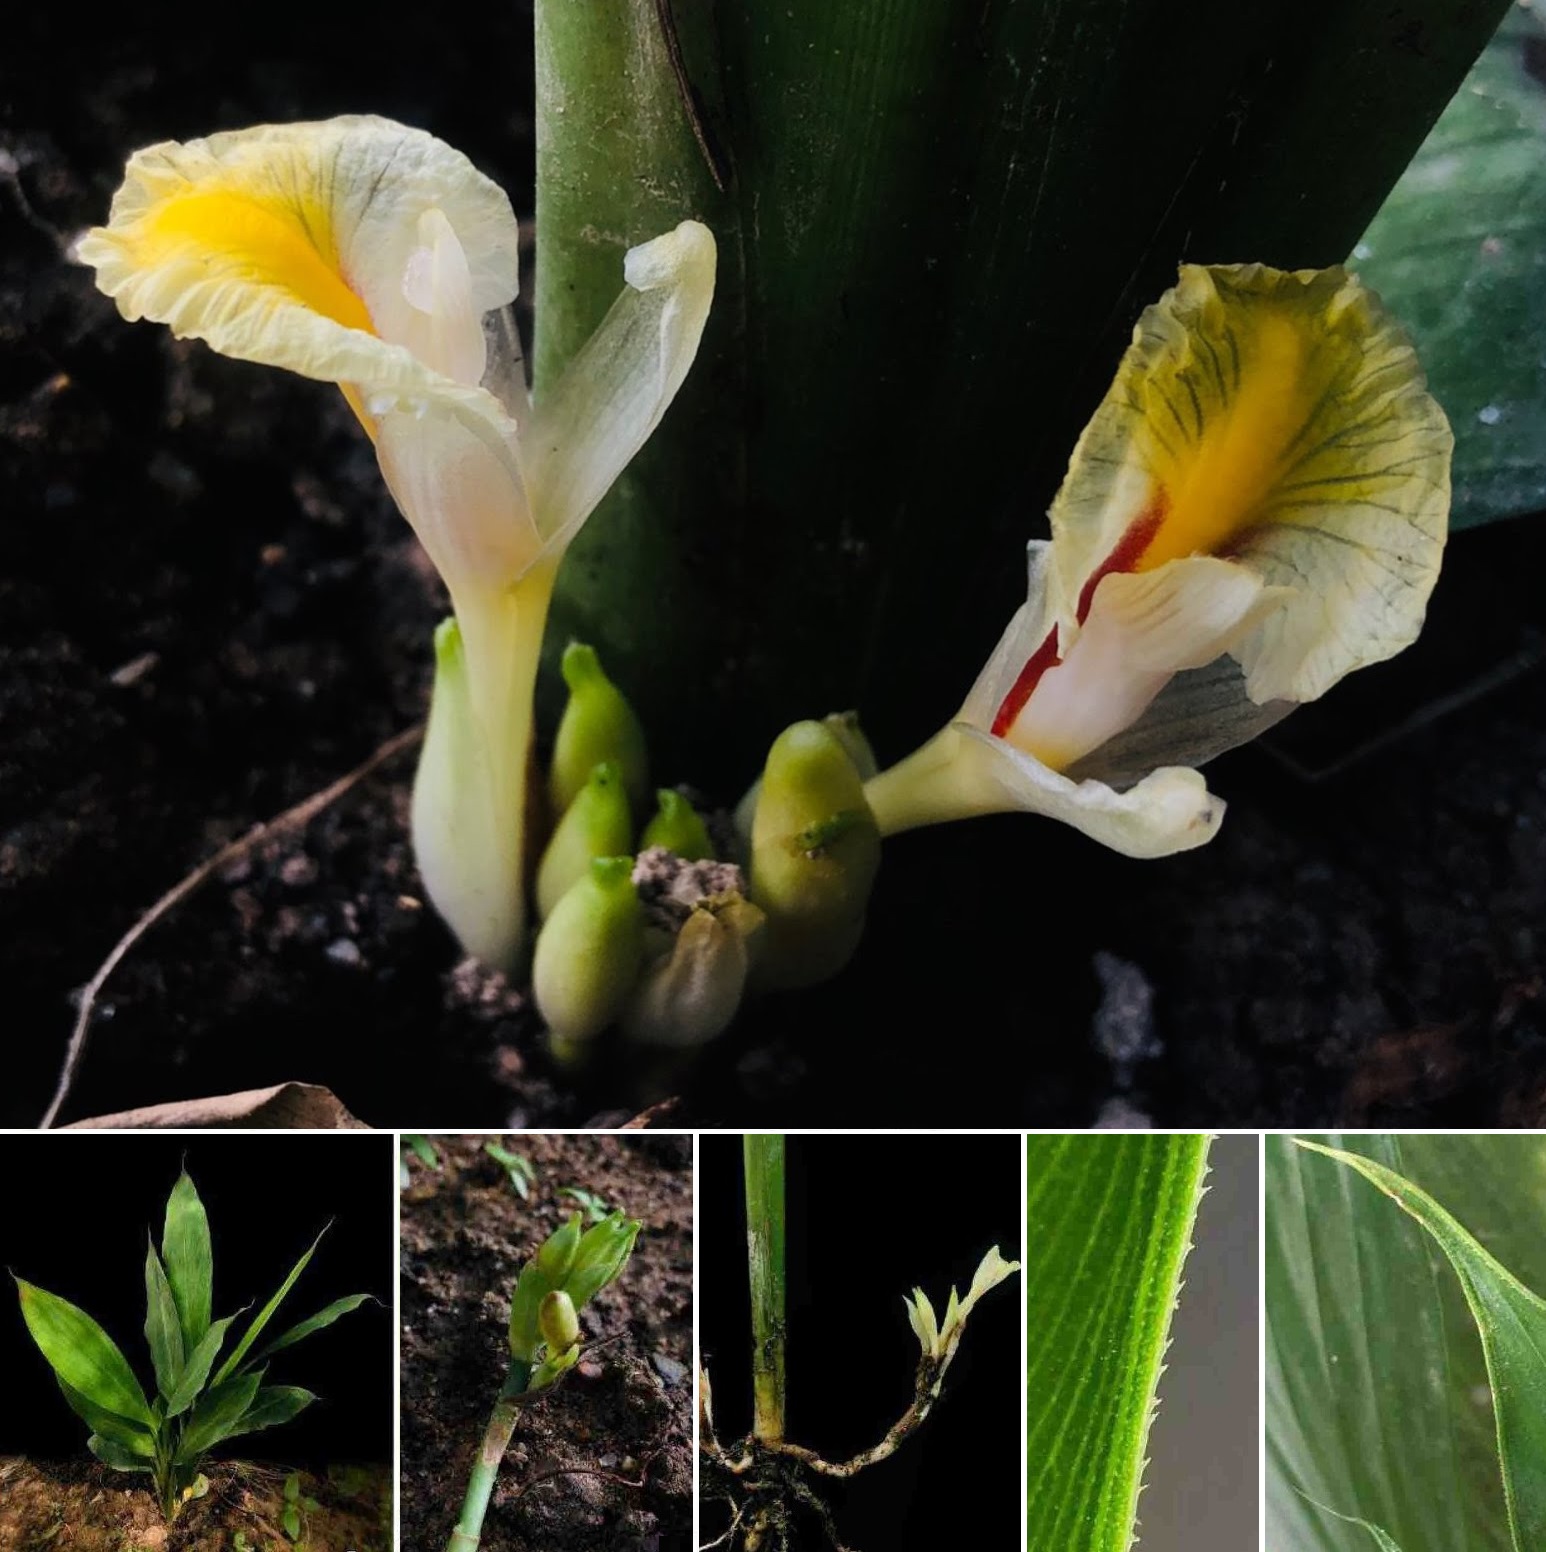 Amomum foetidum, a plant from the ginger family (Thawatphong Boonma/PA)